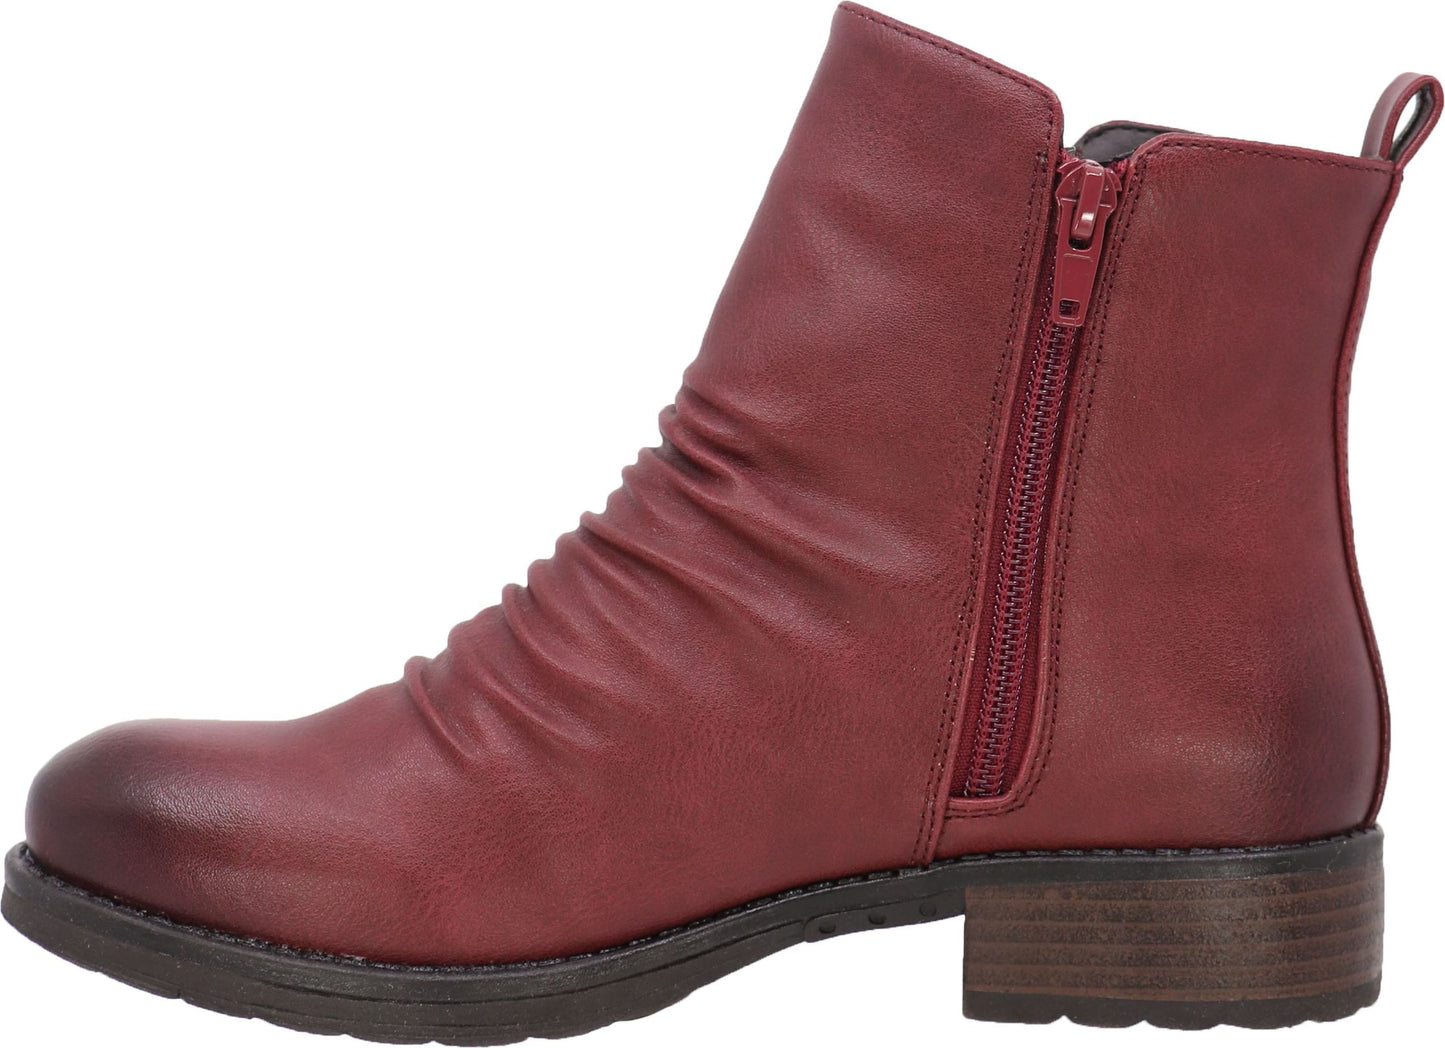 Taxi Boots Addison 08 Red